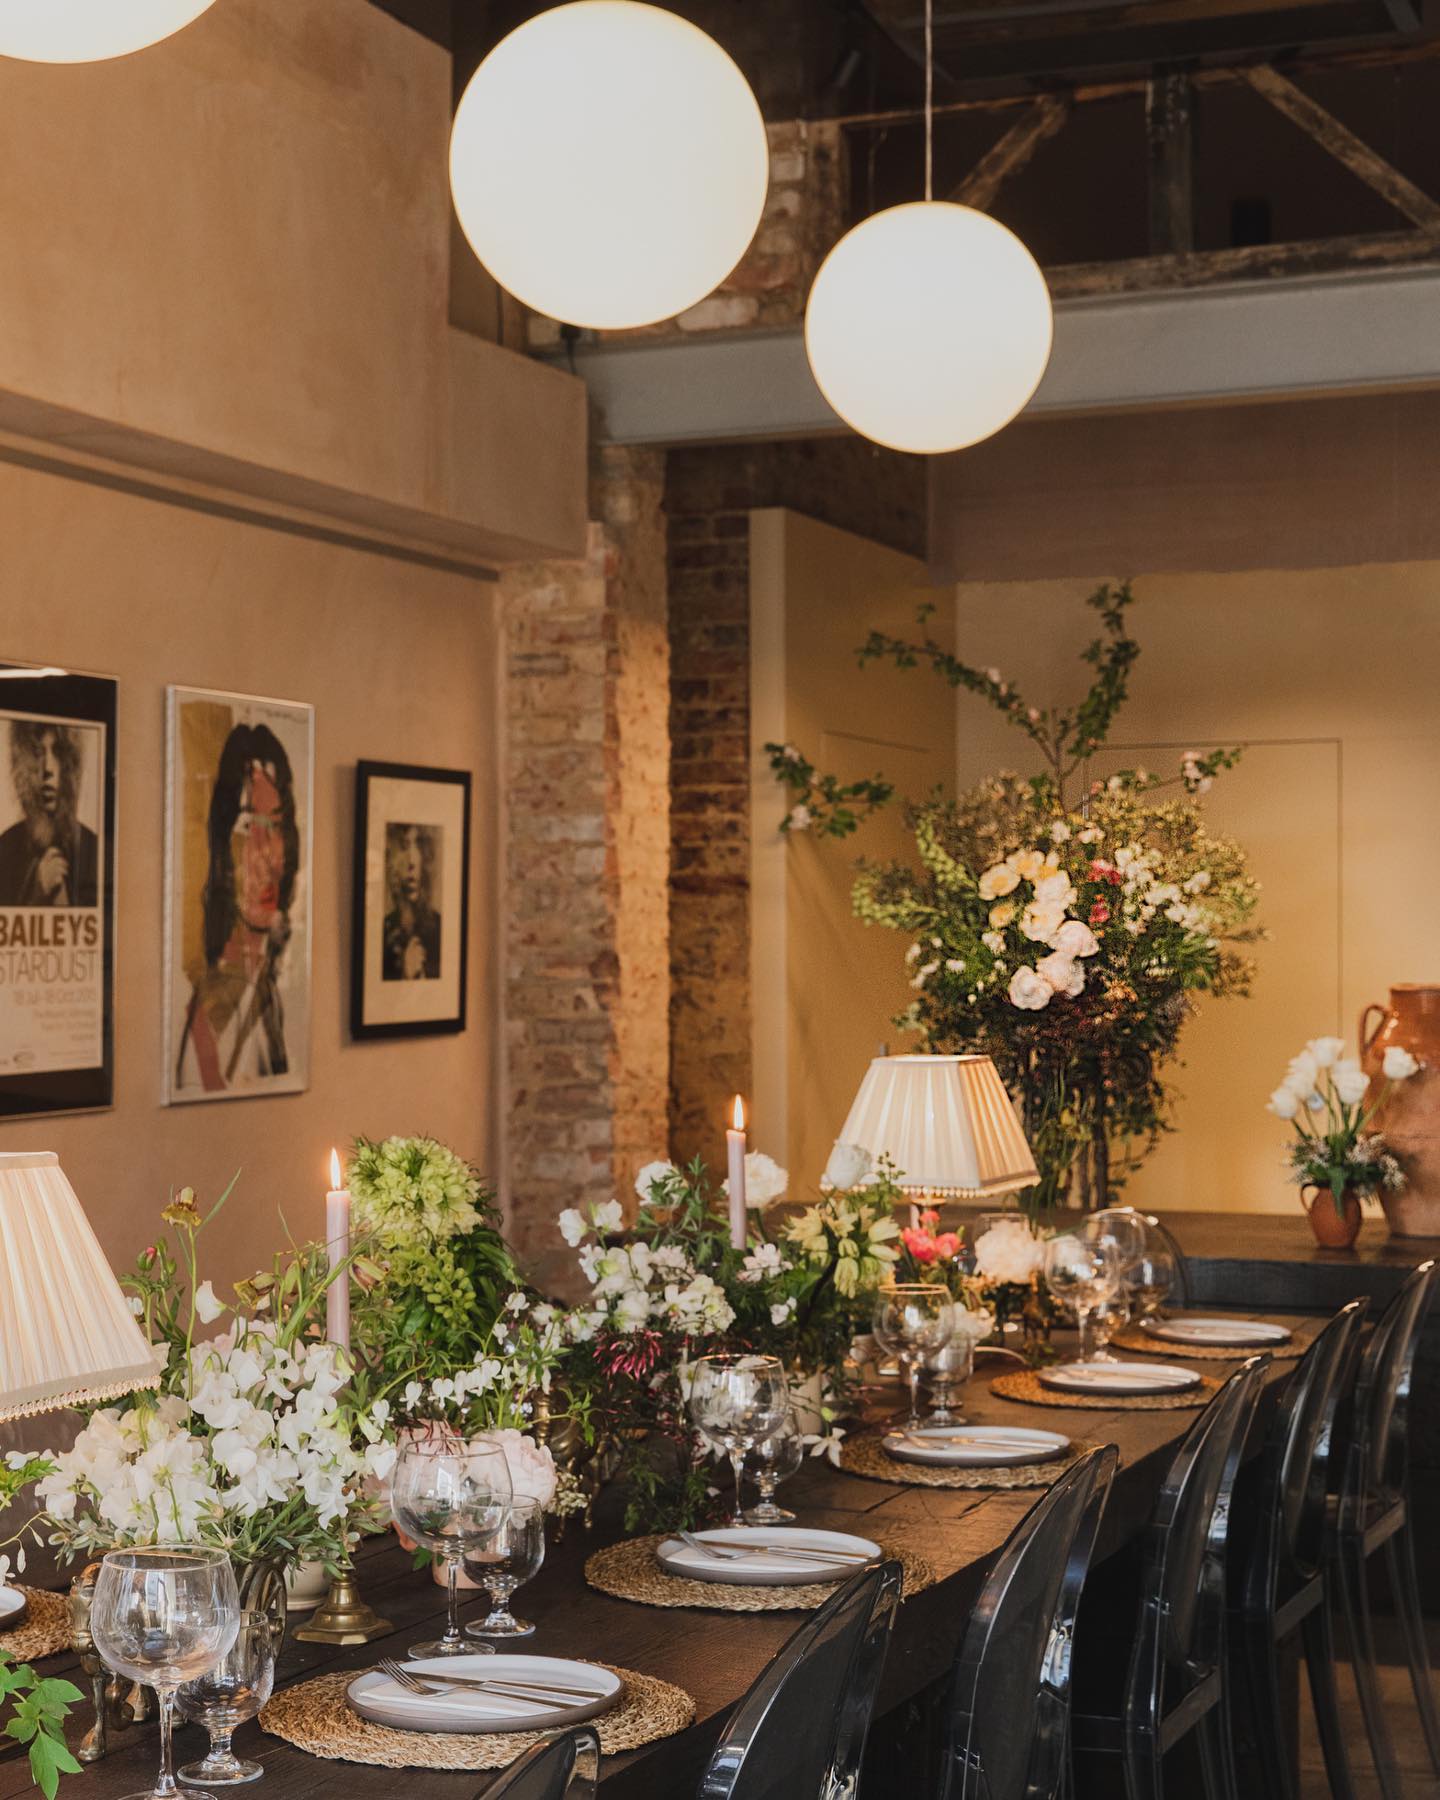 The best private dining rooms in London | The art-filled private dining room at Curious Kudu, Peckham